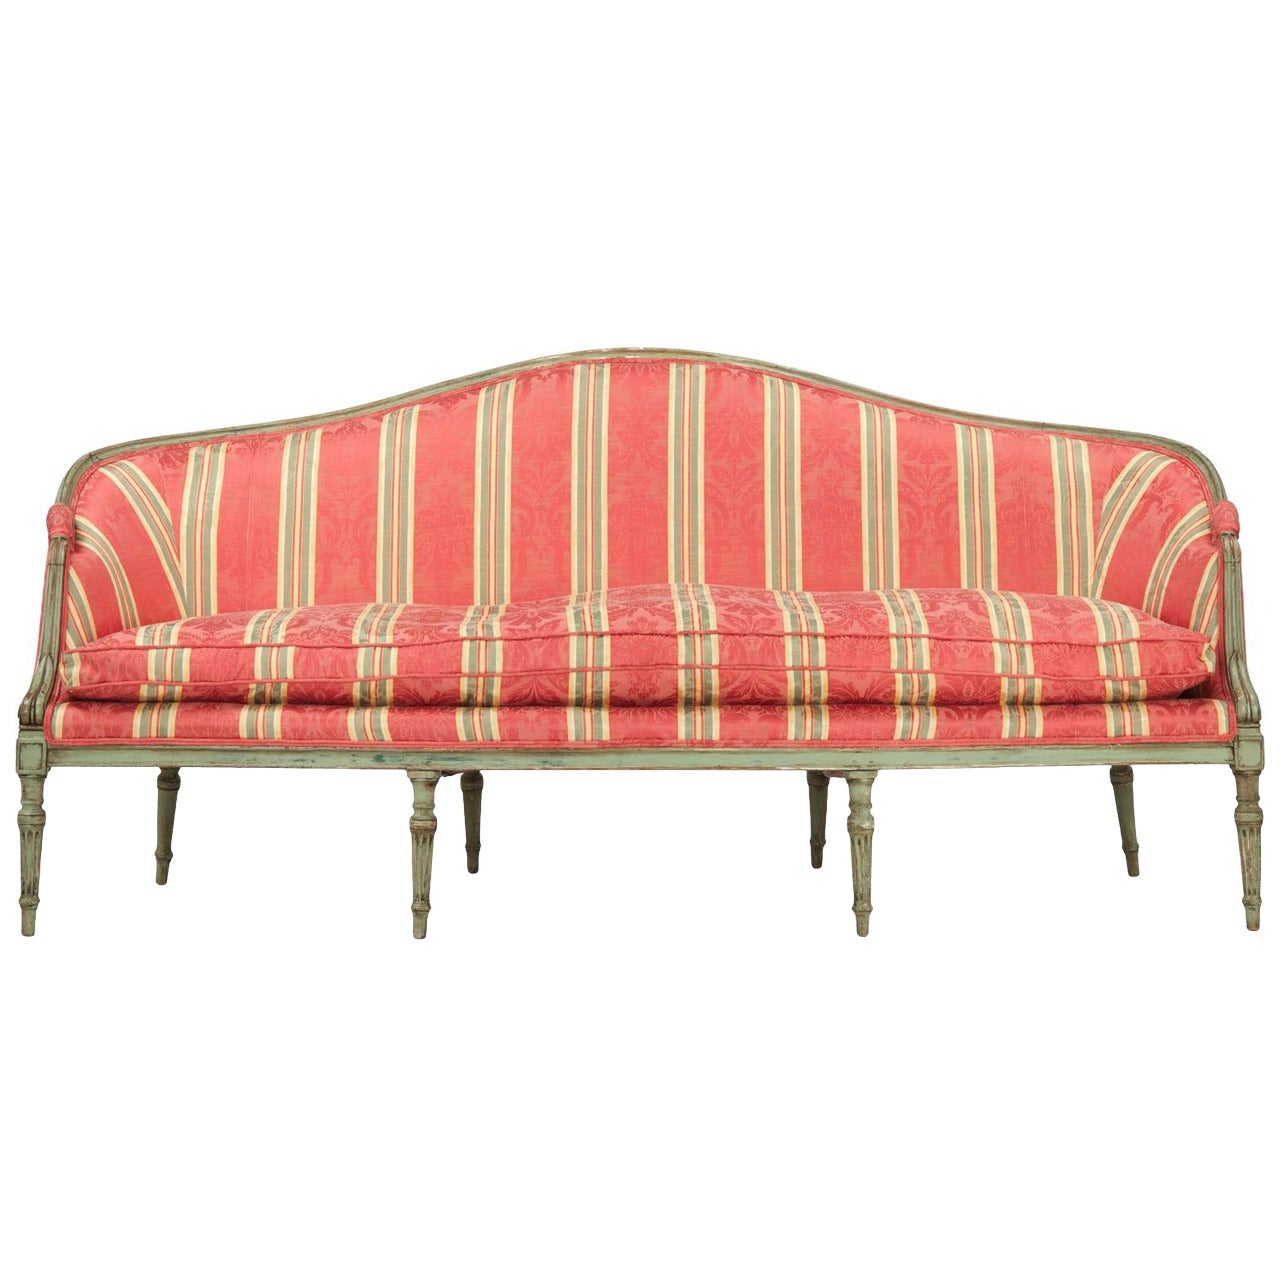 French Louis XVI Painted Antique Settee Sofa, 18th Century